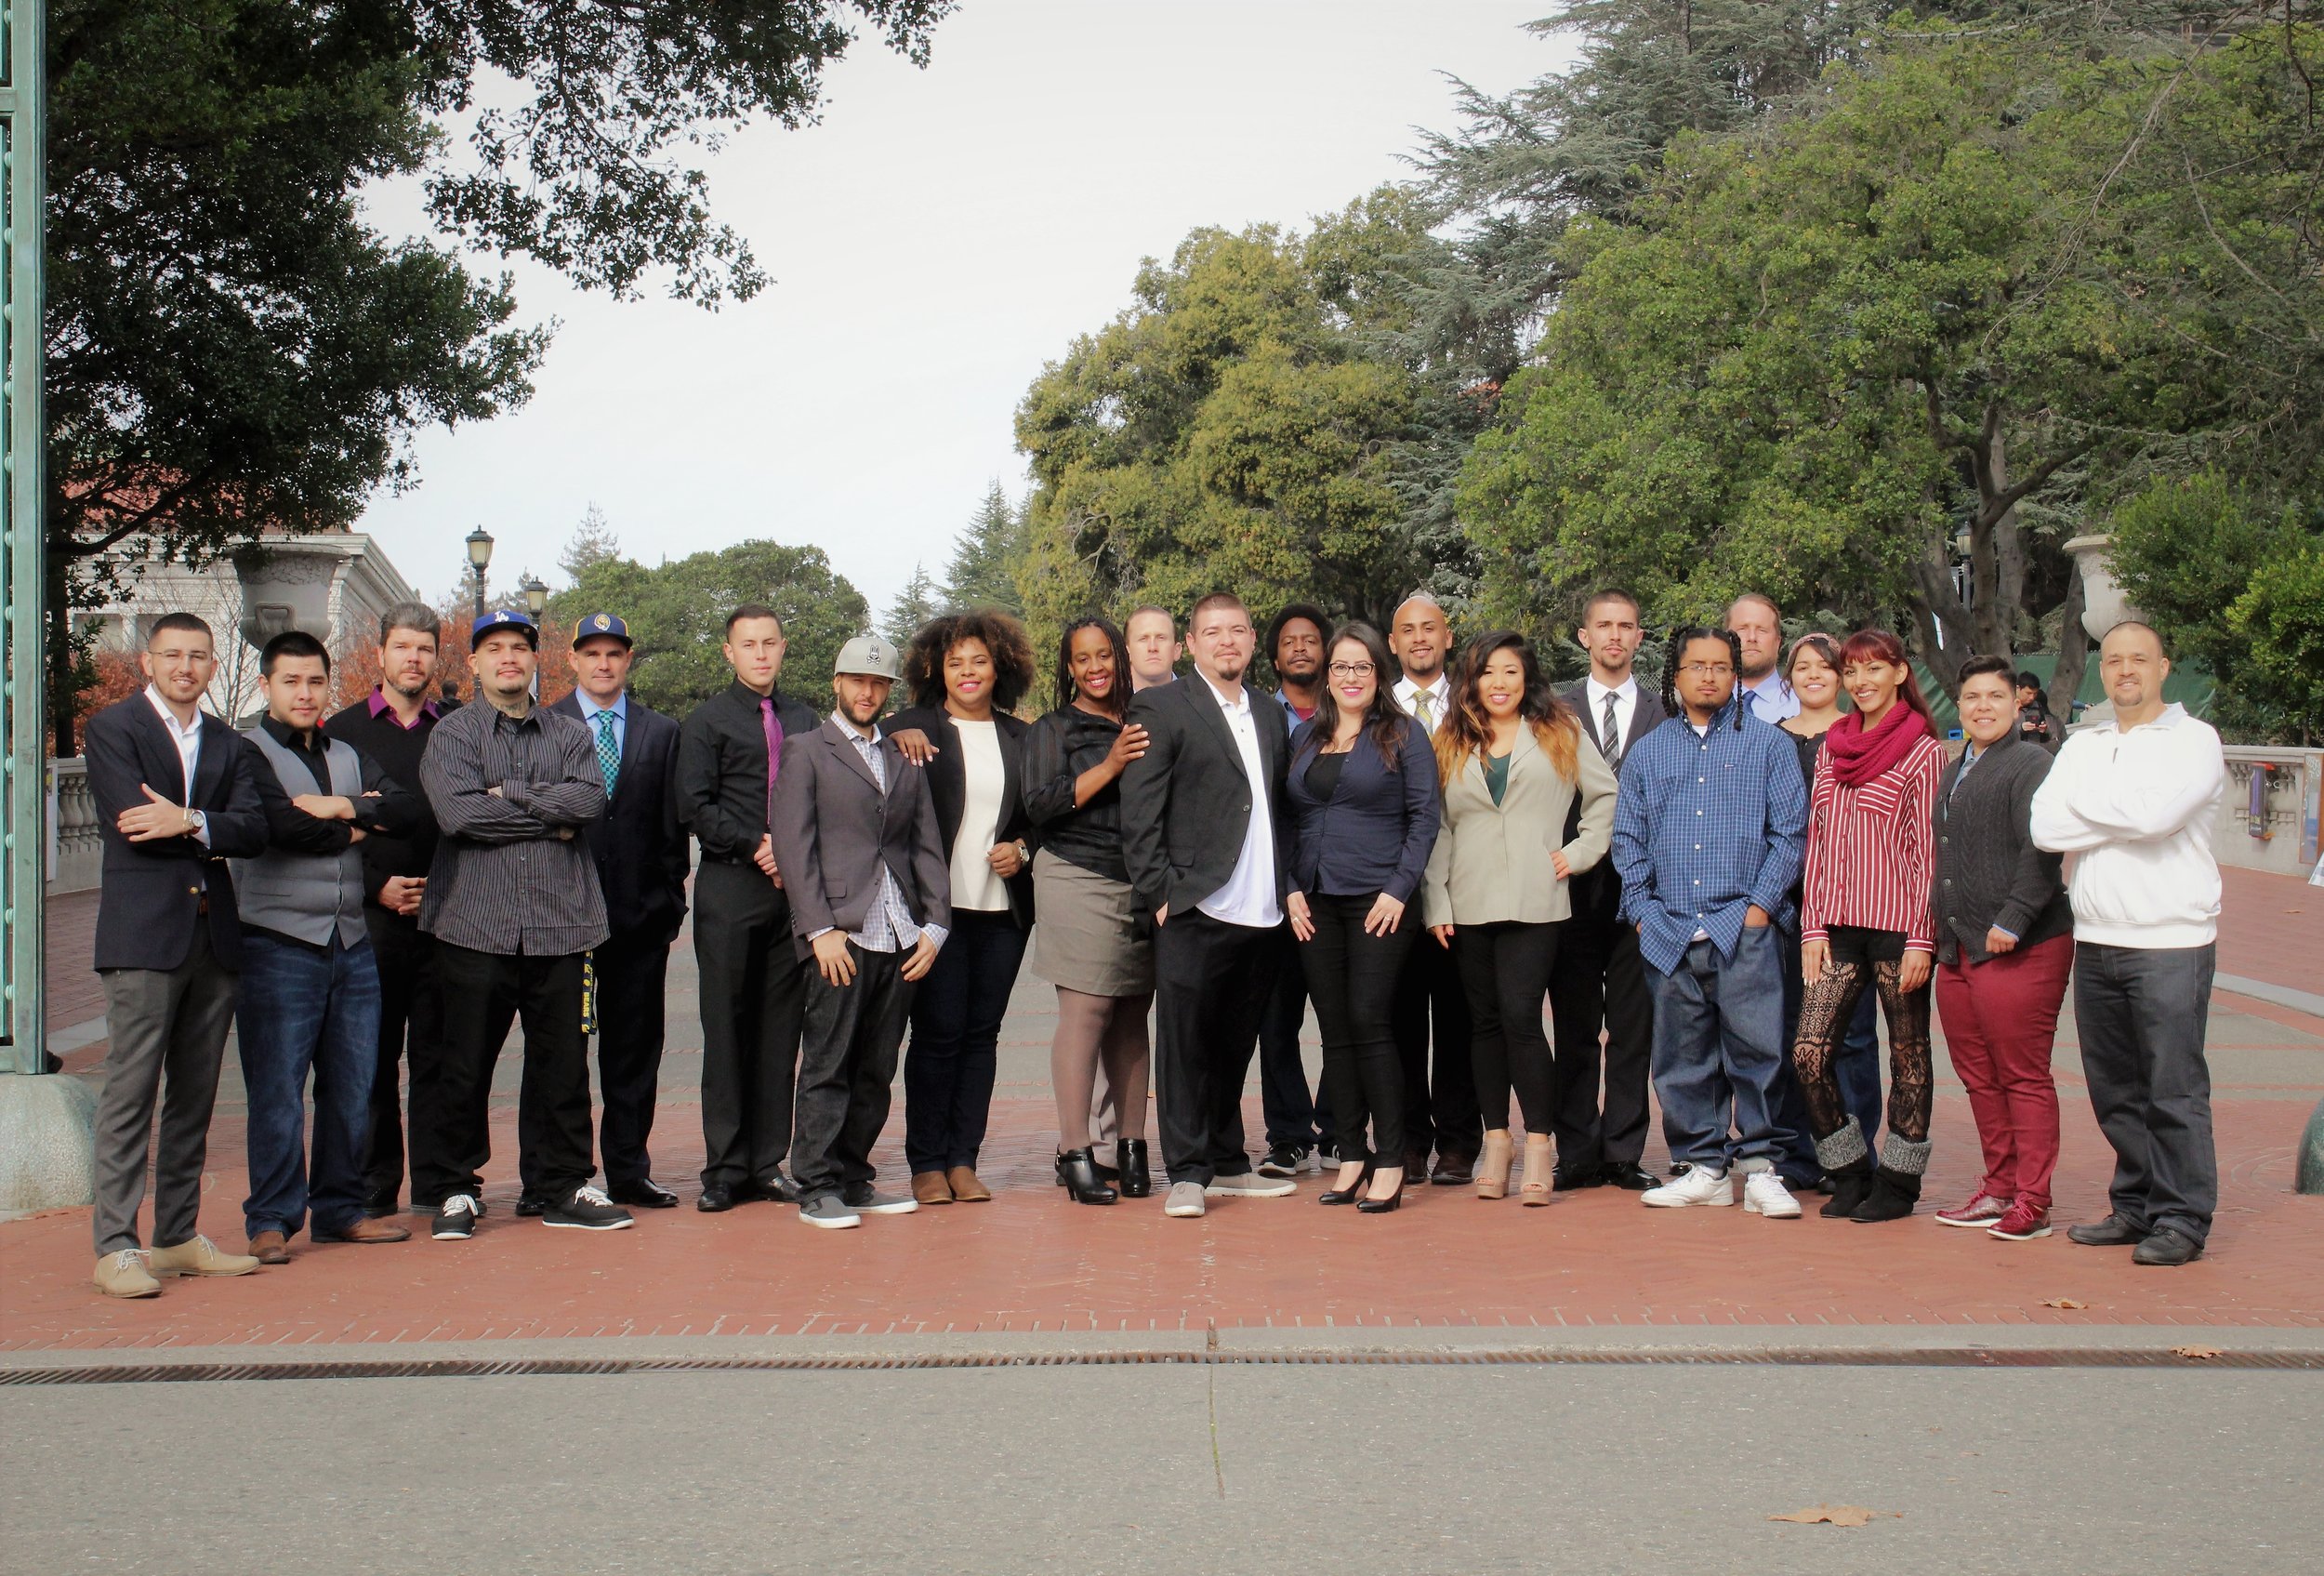  Professional development day and group photo with students and staff members of the Berkeley Underground Scholars. 